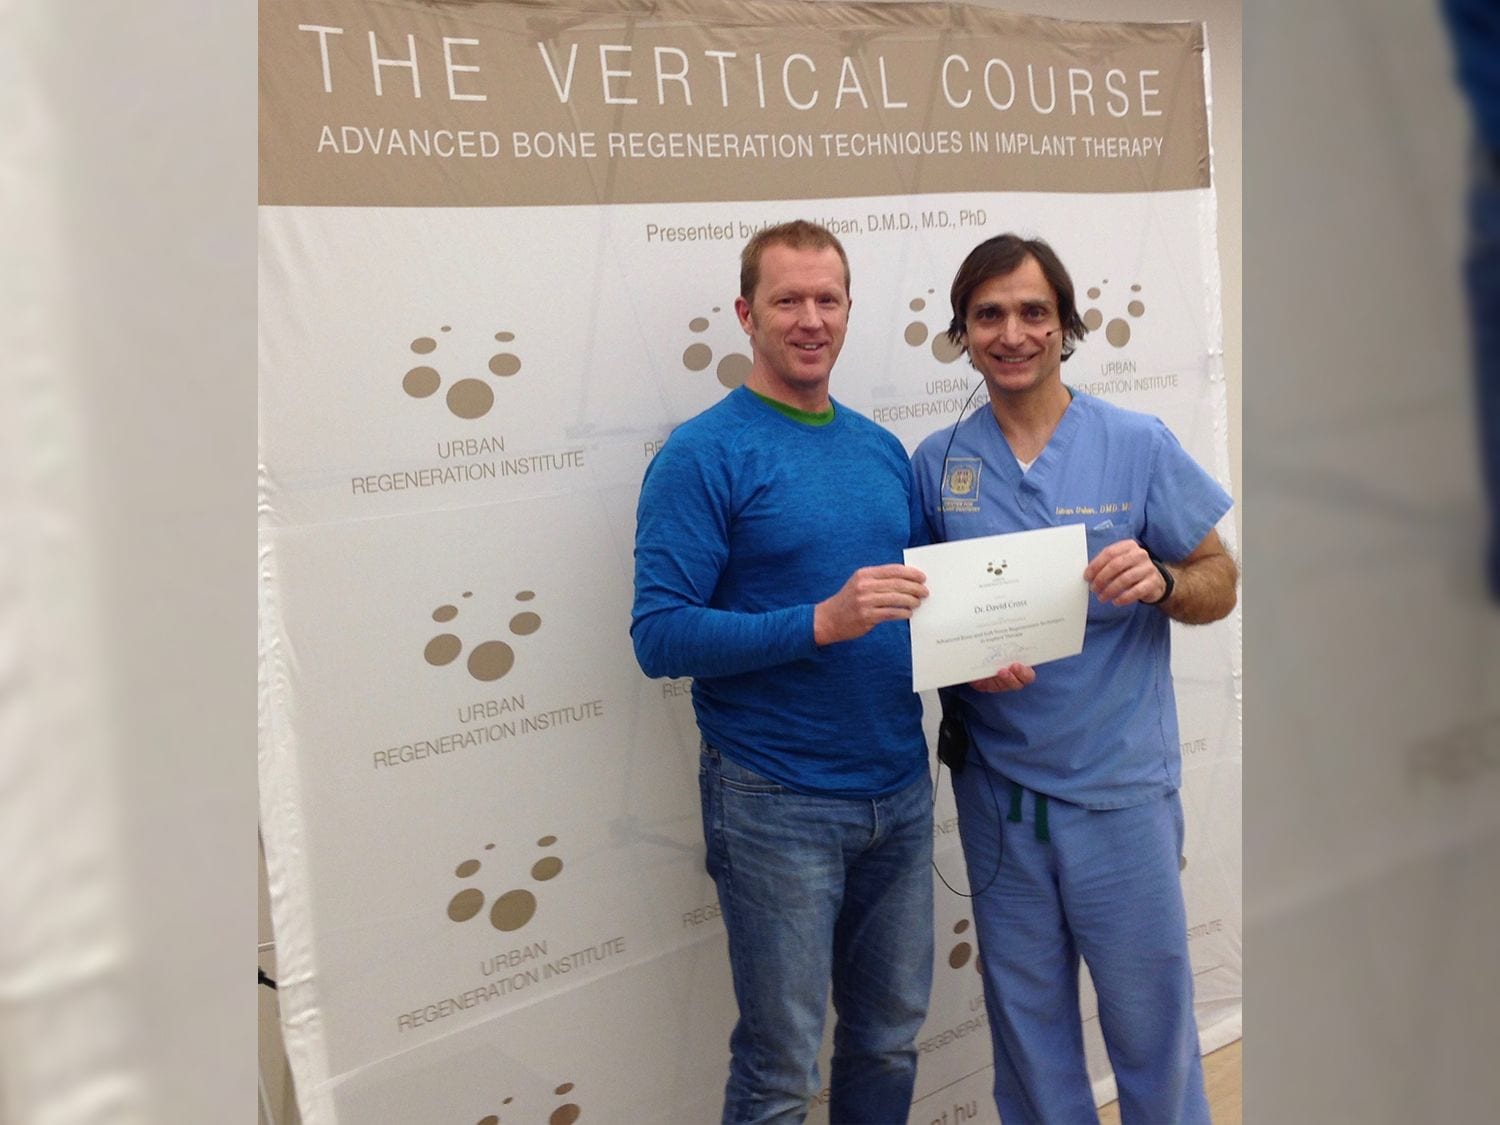 Dr. Cross Receiving Certificate at The Vertical Course